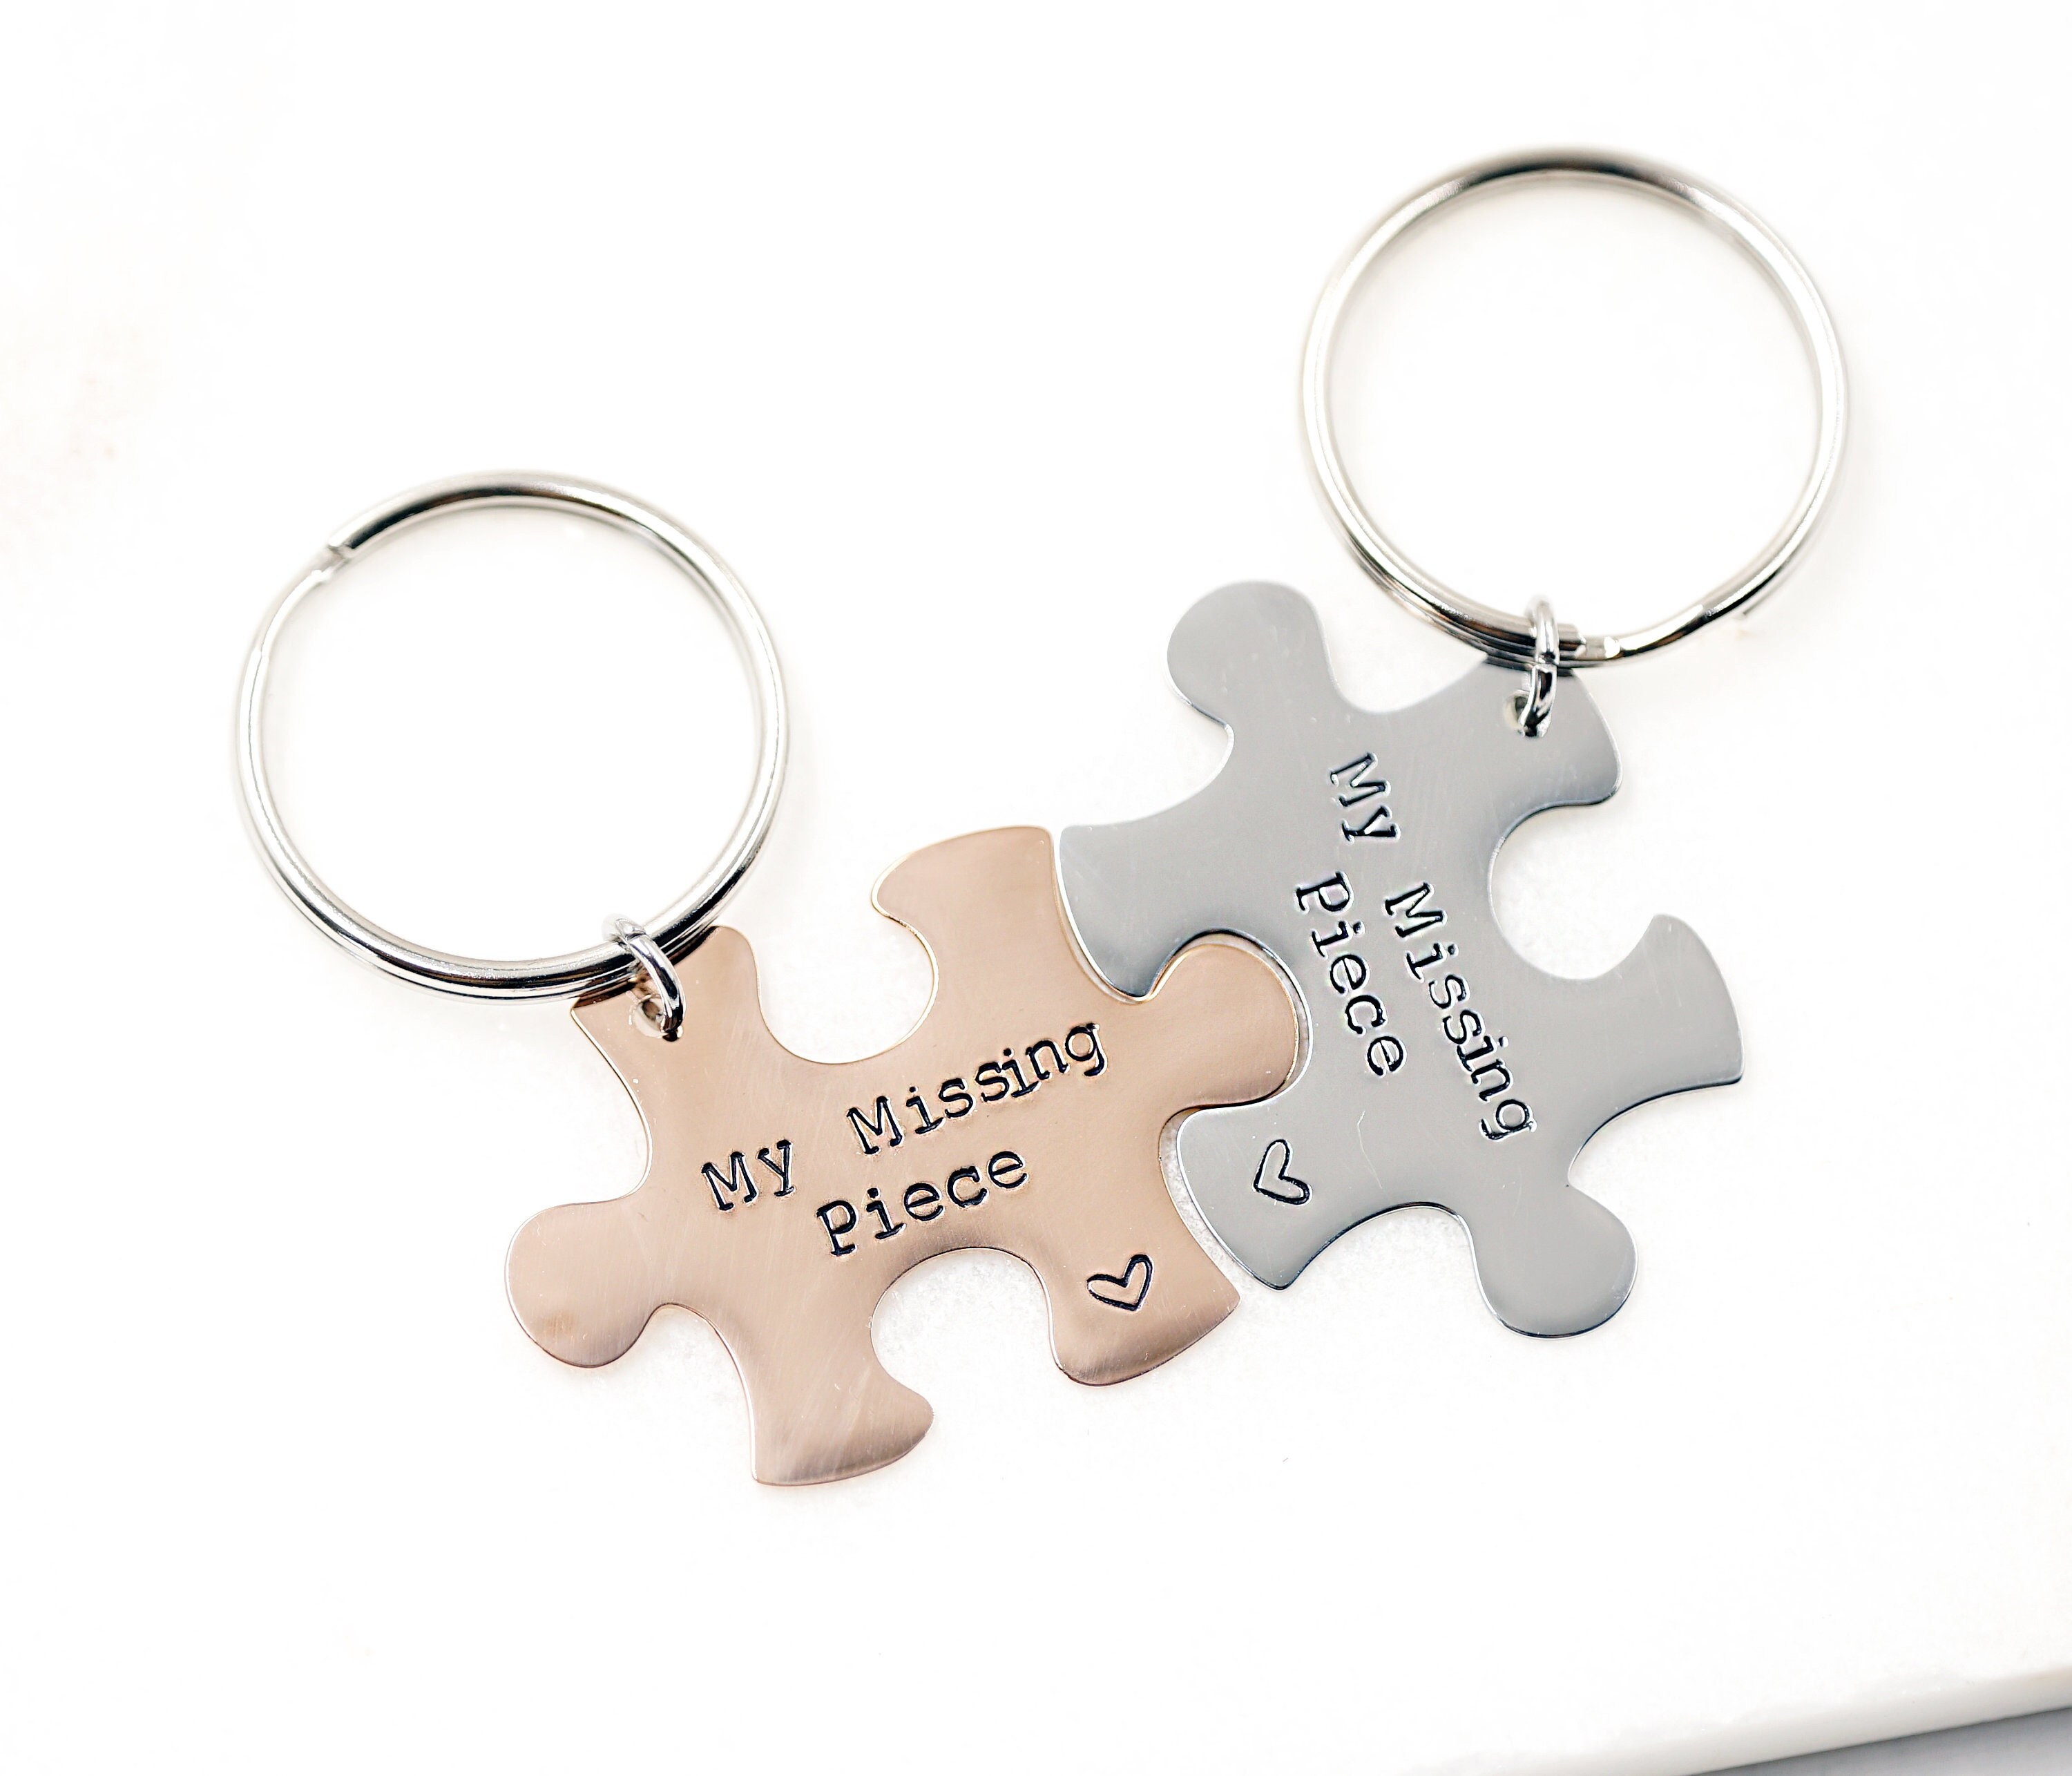 Keychain for Him Anniversary Puzzle Piece Keychains 10 Year Anniversary Gift Personalized Couples Keychains Accessoires Sleutelhangers & Keycords Sleutelhangers His Hers keychains 